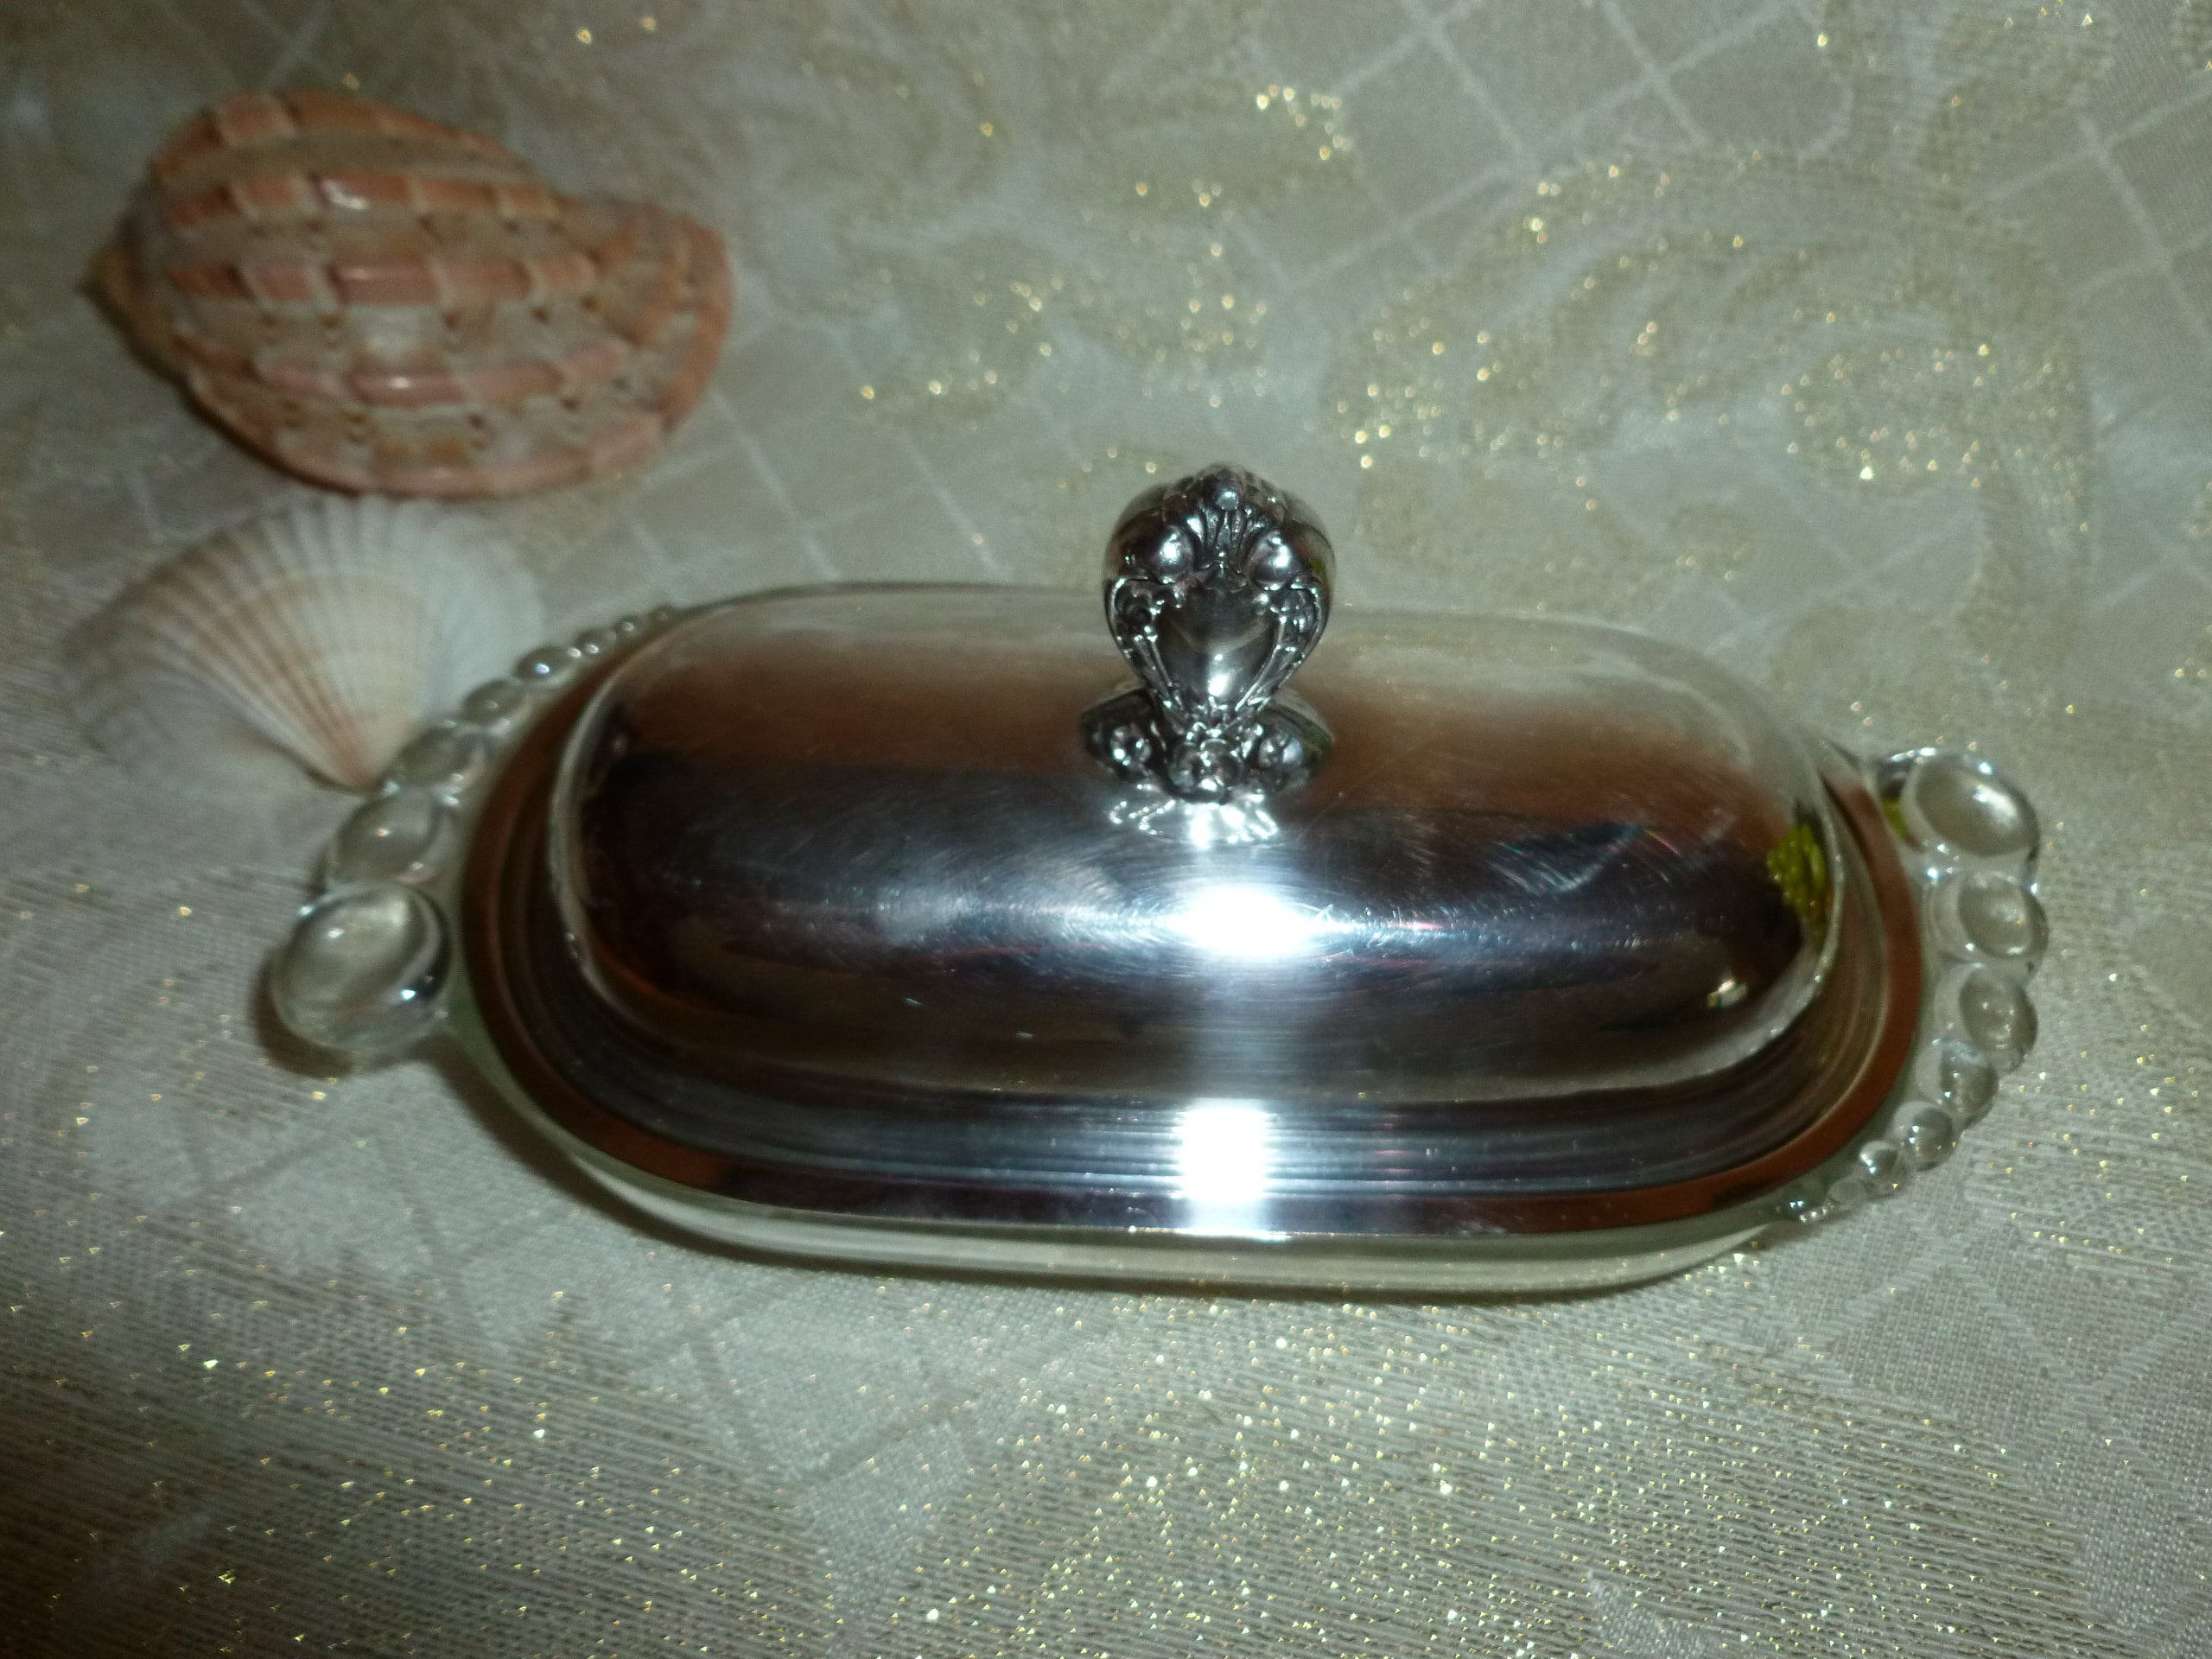 Vintage Butter Dish Rogers Bros IS Lid Heart Finial Stainless Steel With Lovely Ornate